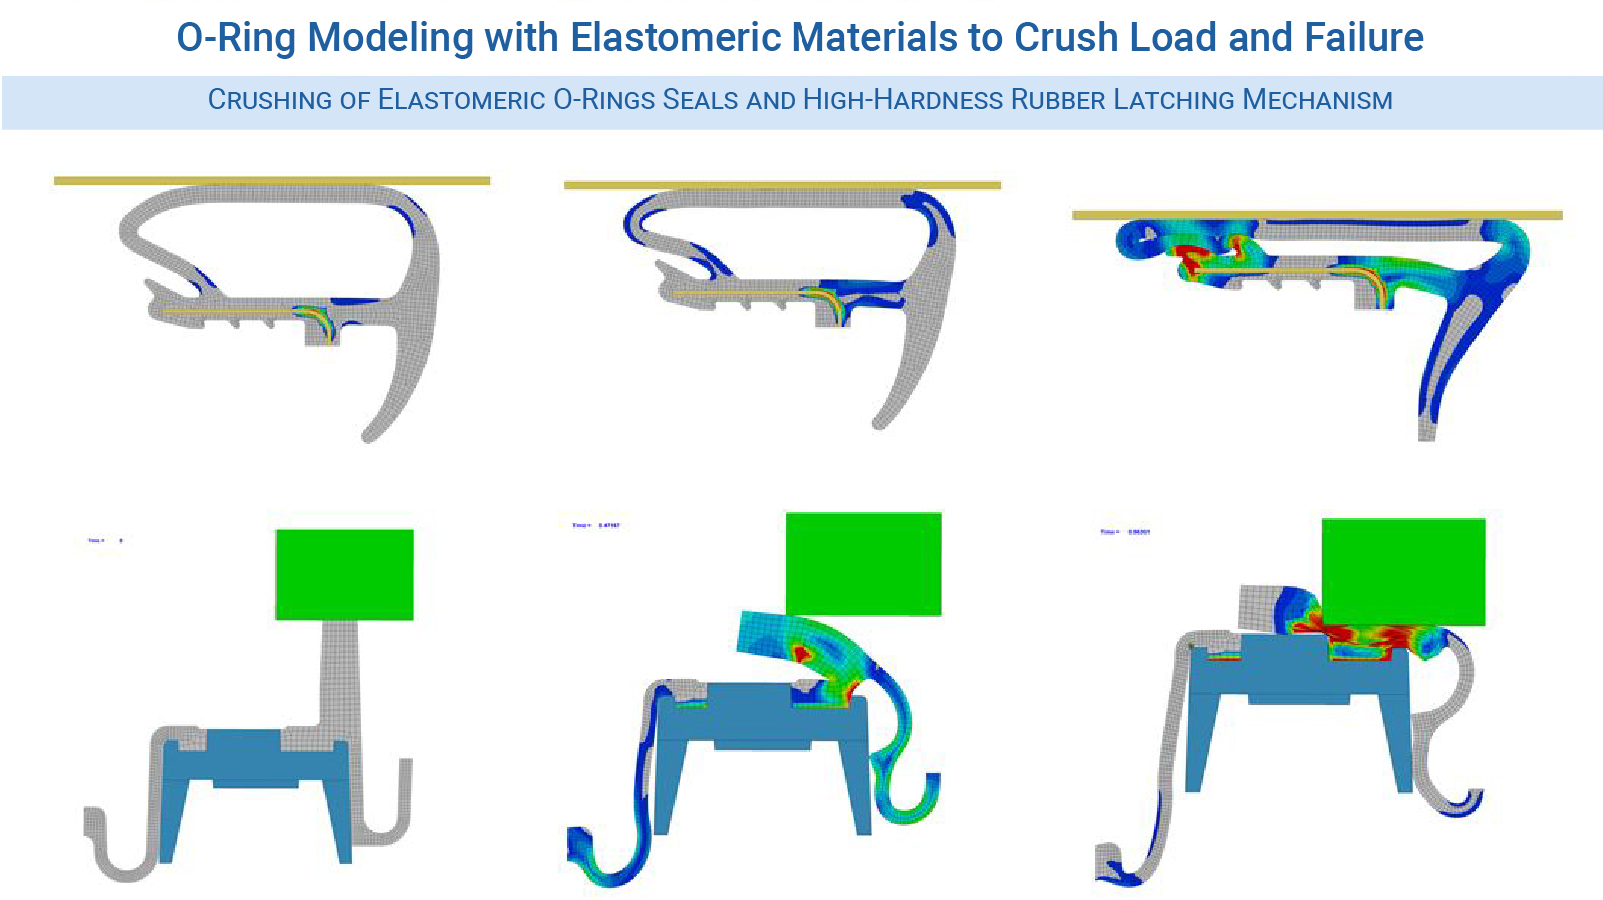 Figure 5 - Open O-Ring seal compaction and high-stiffness rubber latch mechanism crush to failure simulation